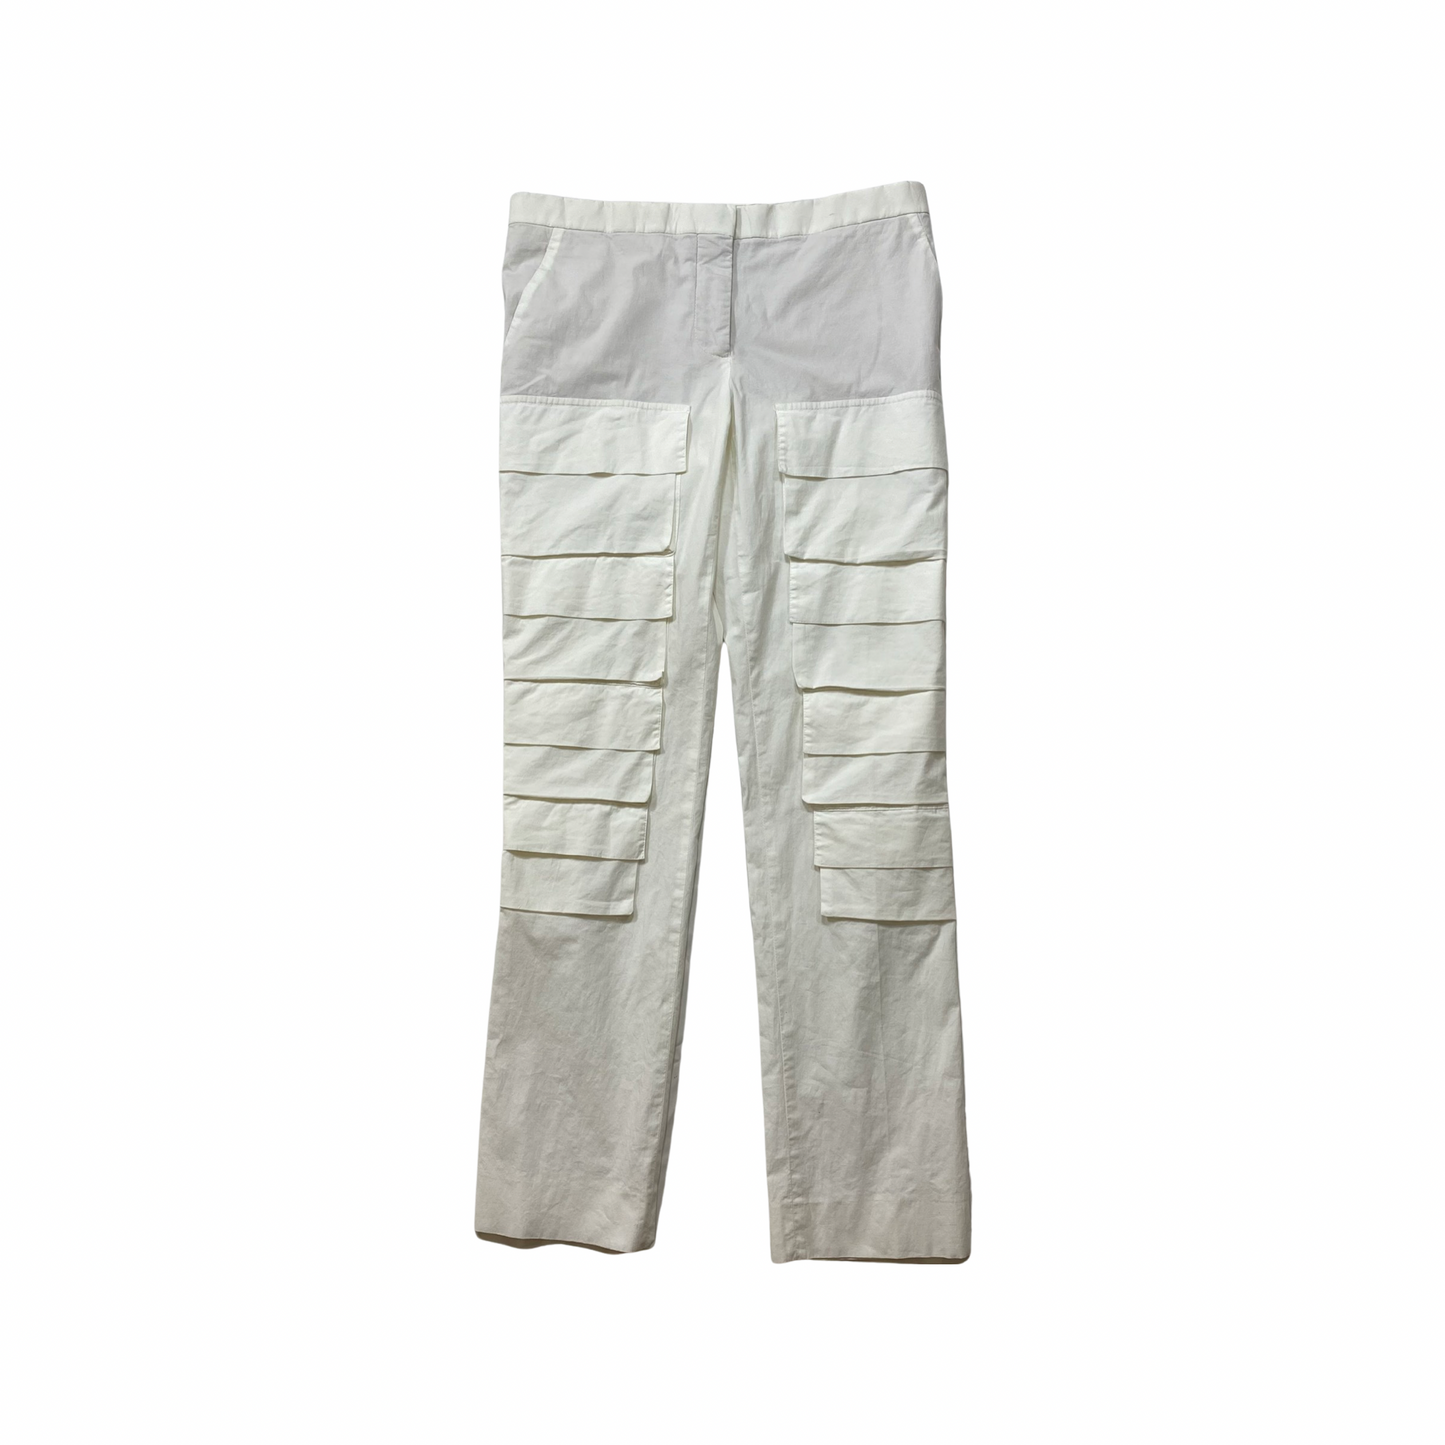 Helmut Lang 8 pocket cargo trousers S/S03